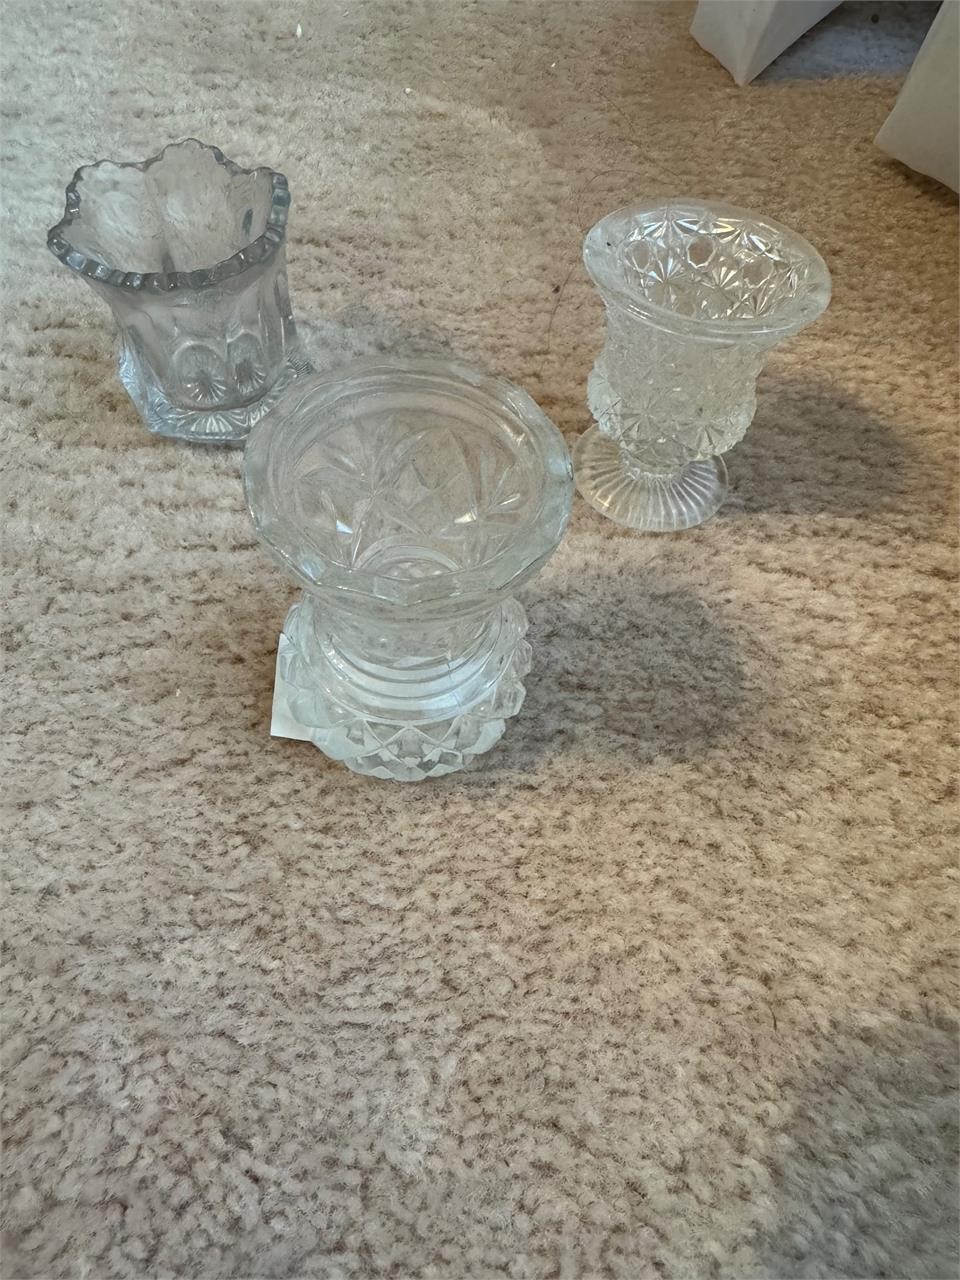 3 CANDLE HOLDERS-TALLEST IS 3"